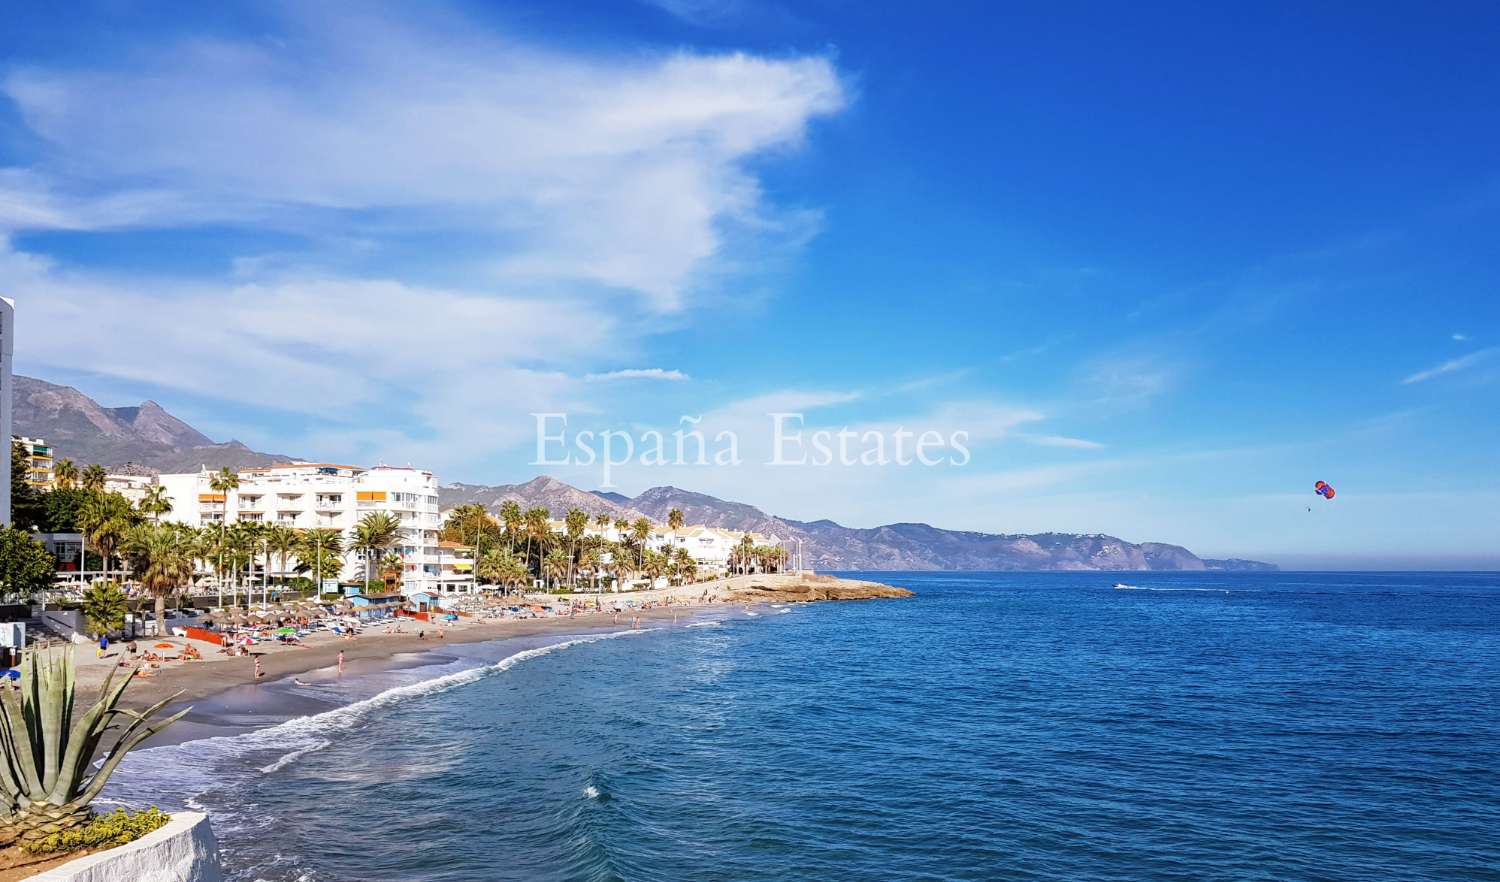 The best view in Nerja!